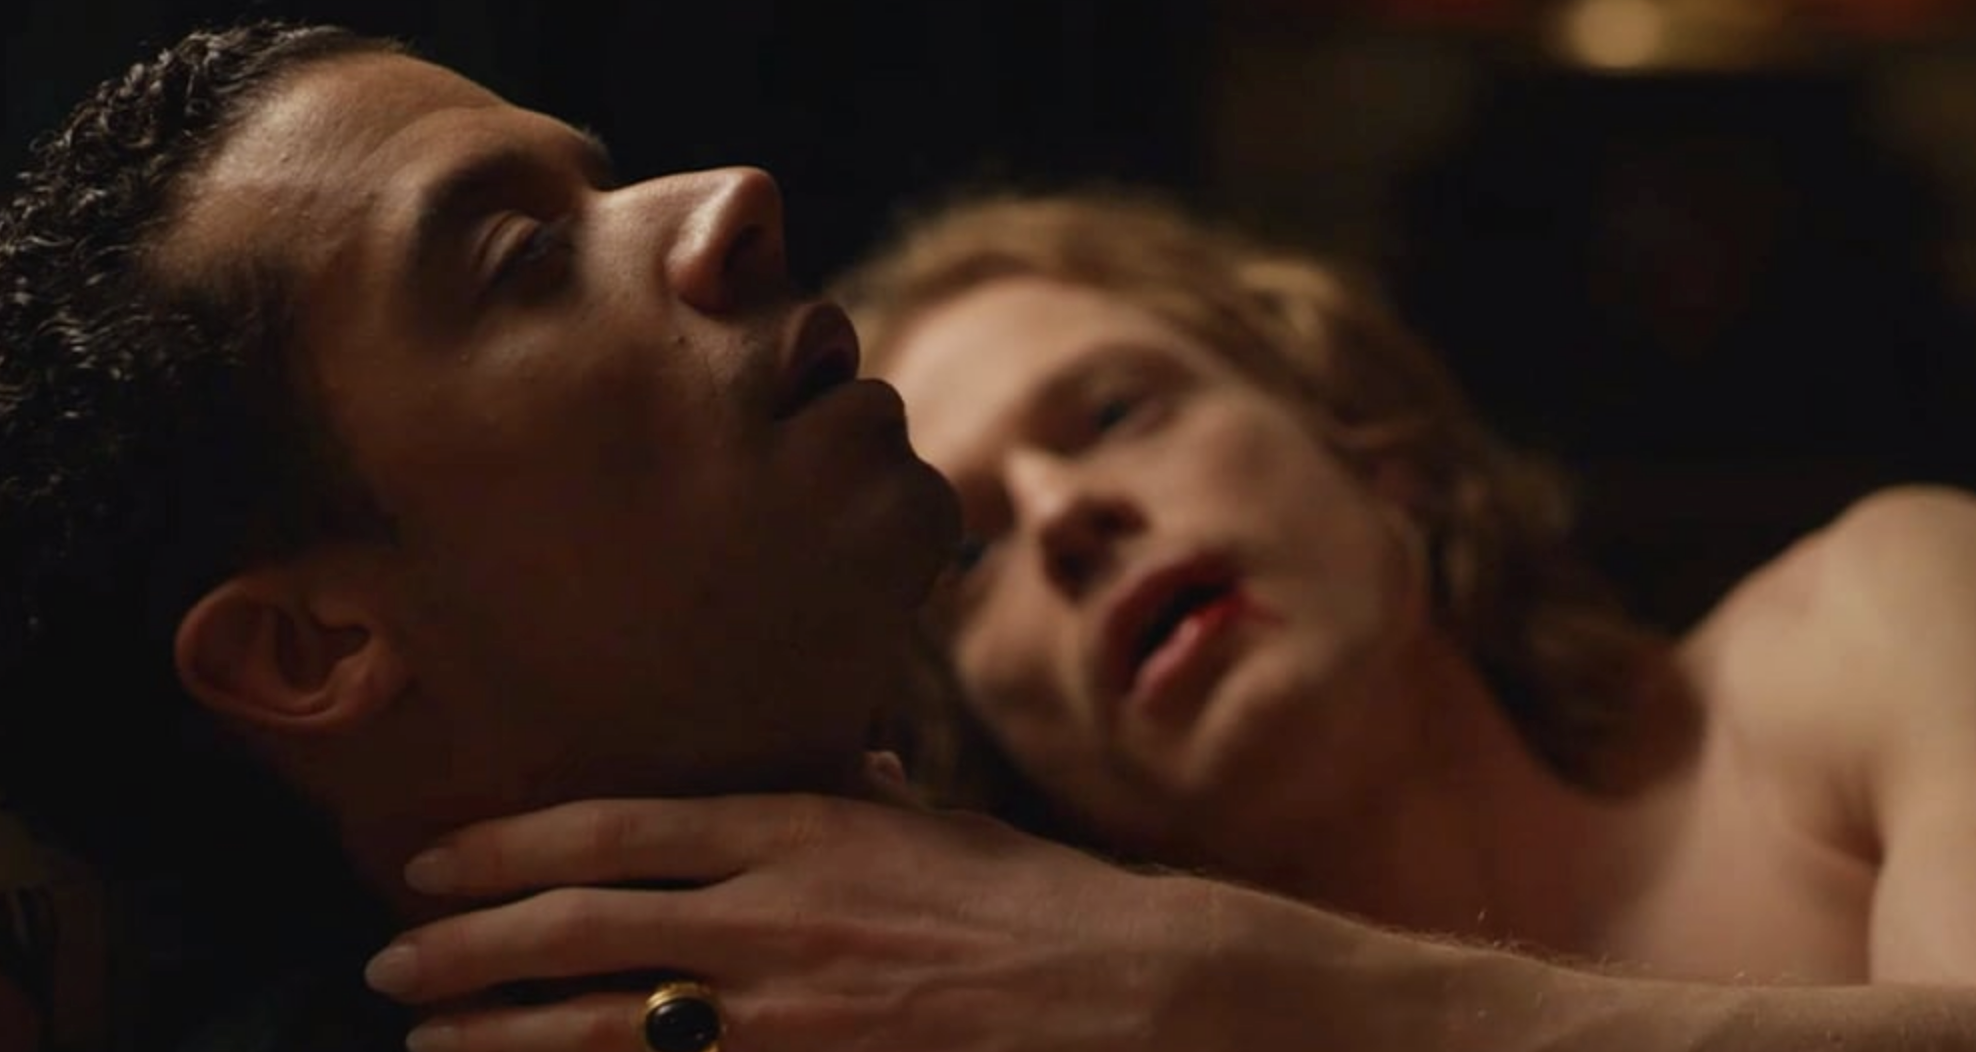 A gay kissing scene in the TV show &quot;Interview with a Vampire&quot;